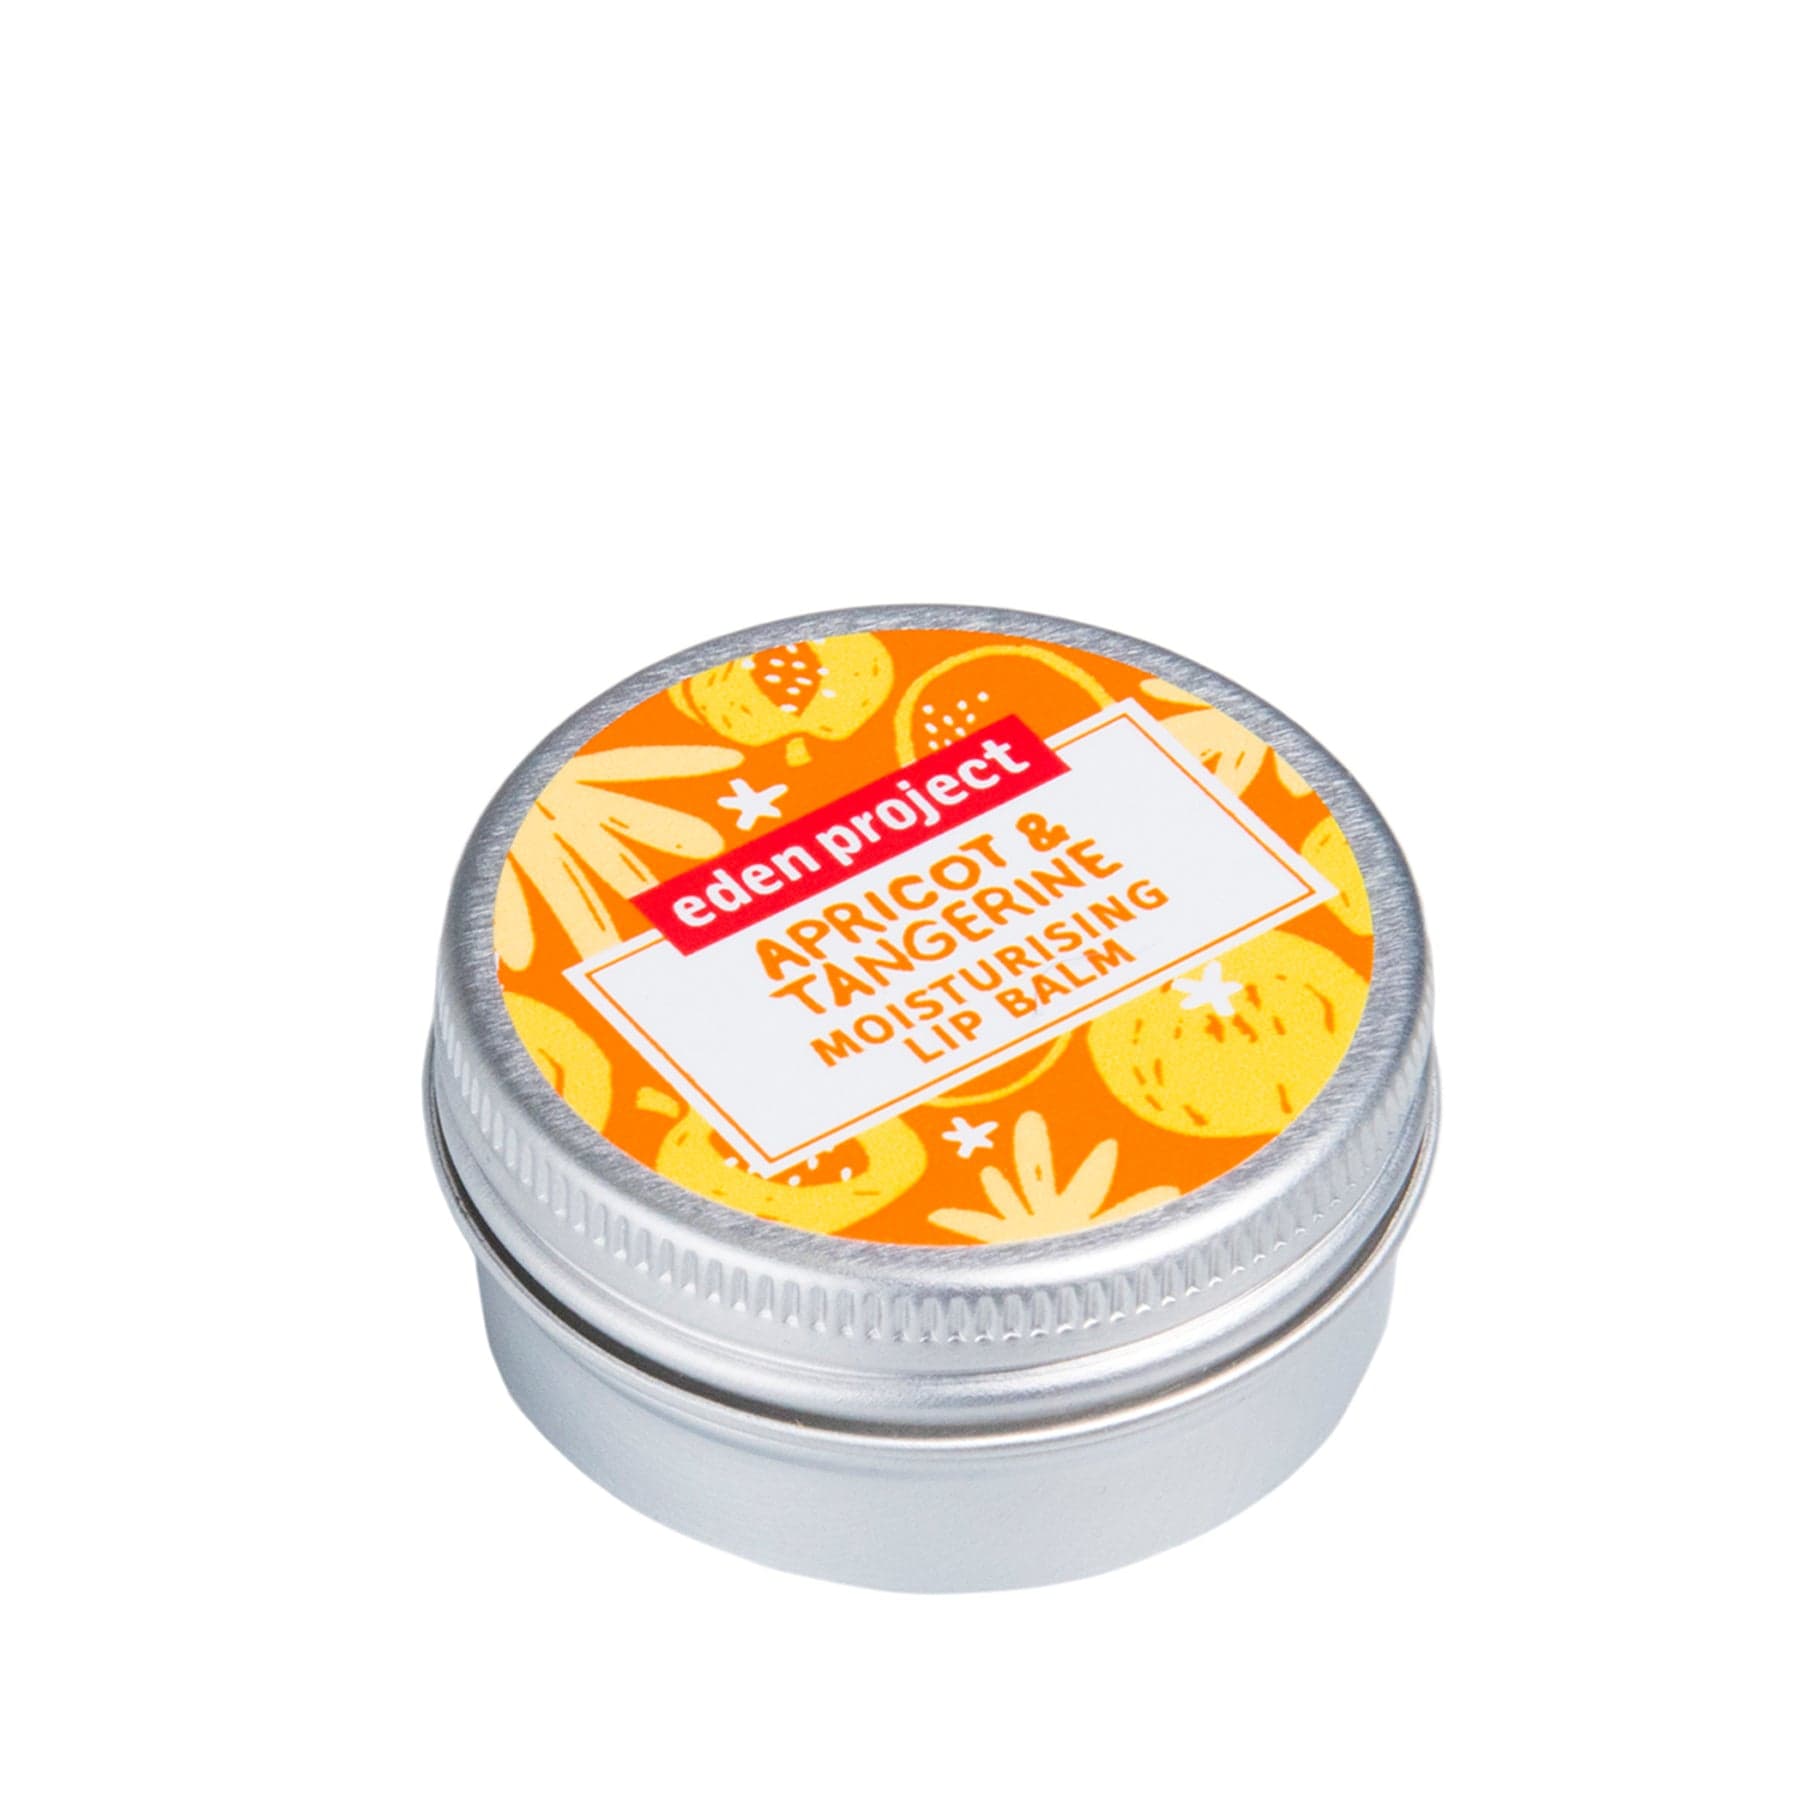 Apricot and Tangerine Moisturizing Lip Balm in tin container from Eden Project on white background.